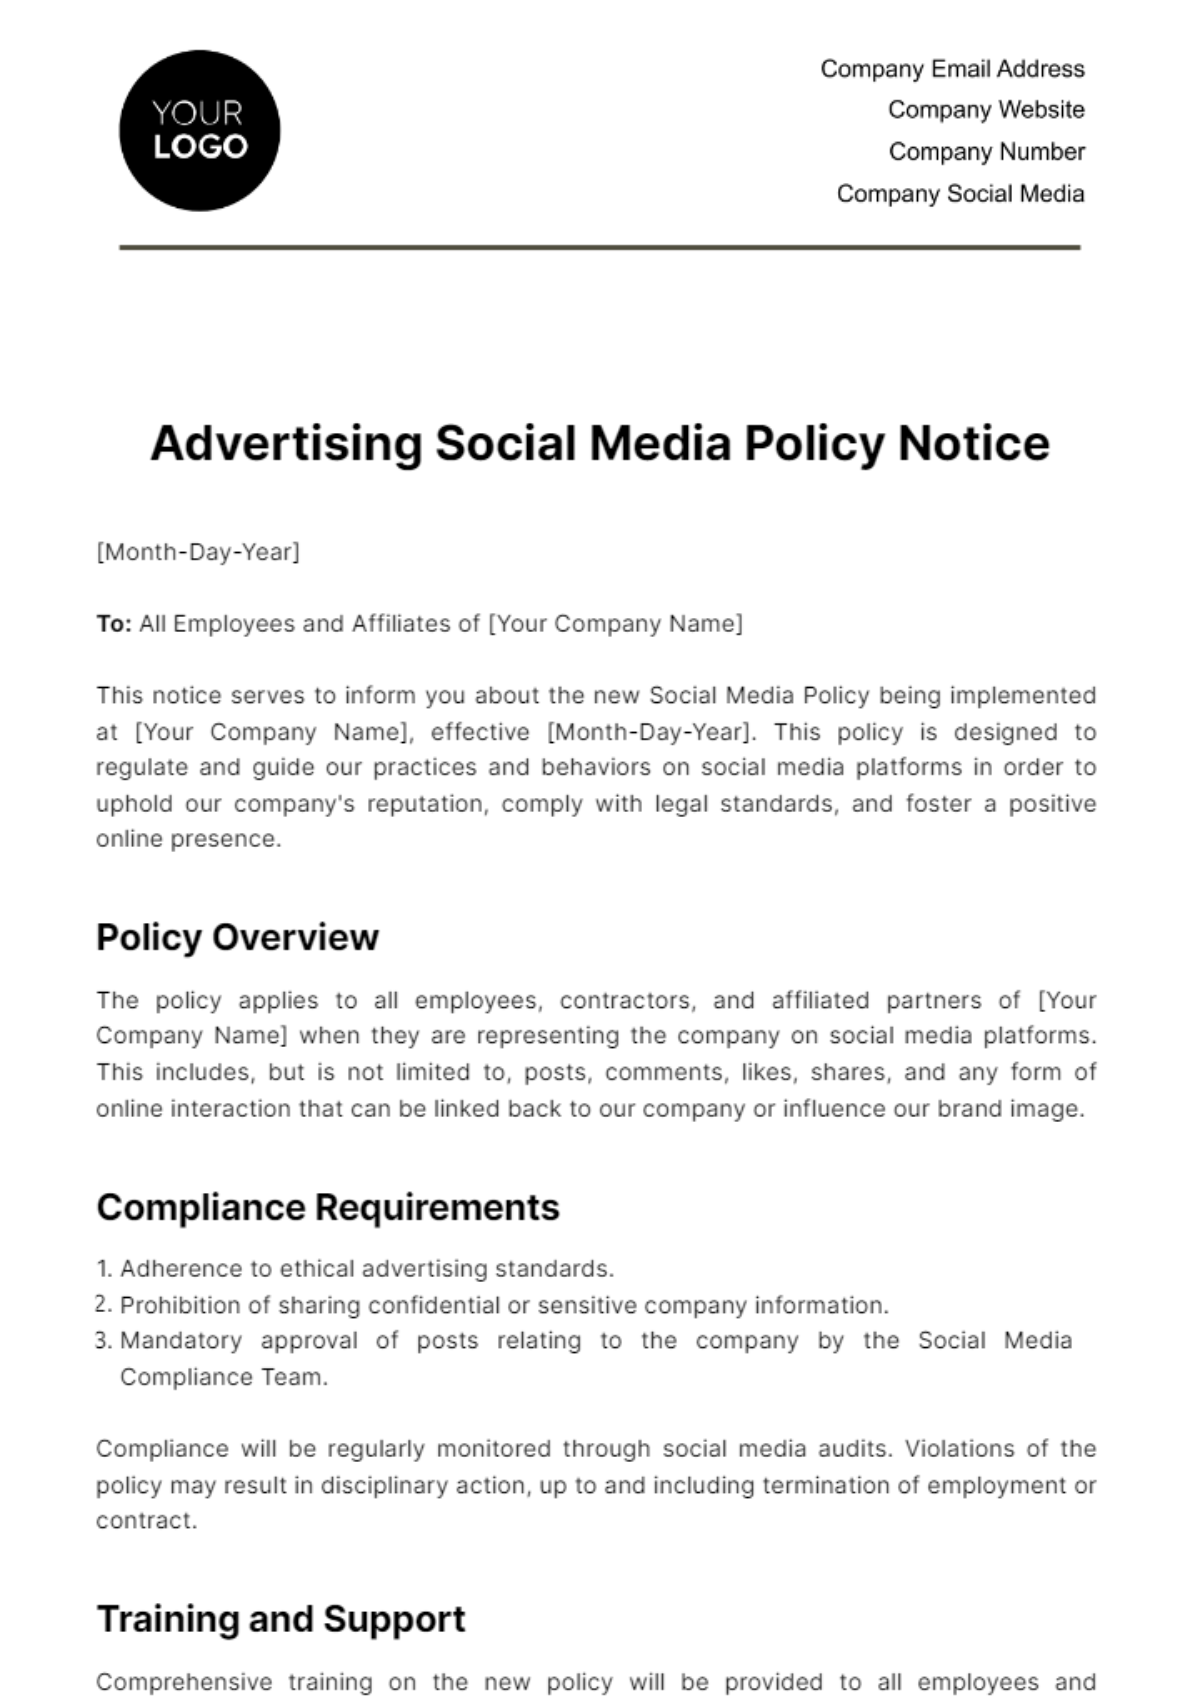 Free Advertising Social Media Policy Notice Template